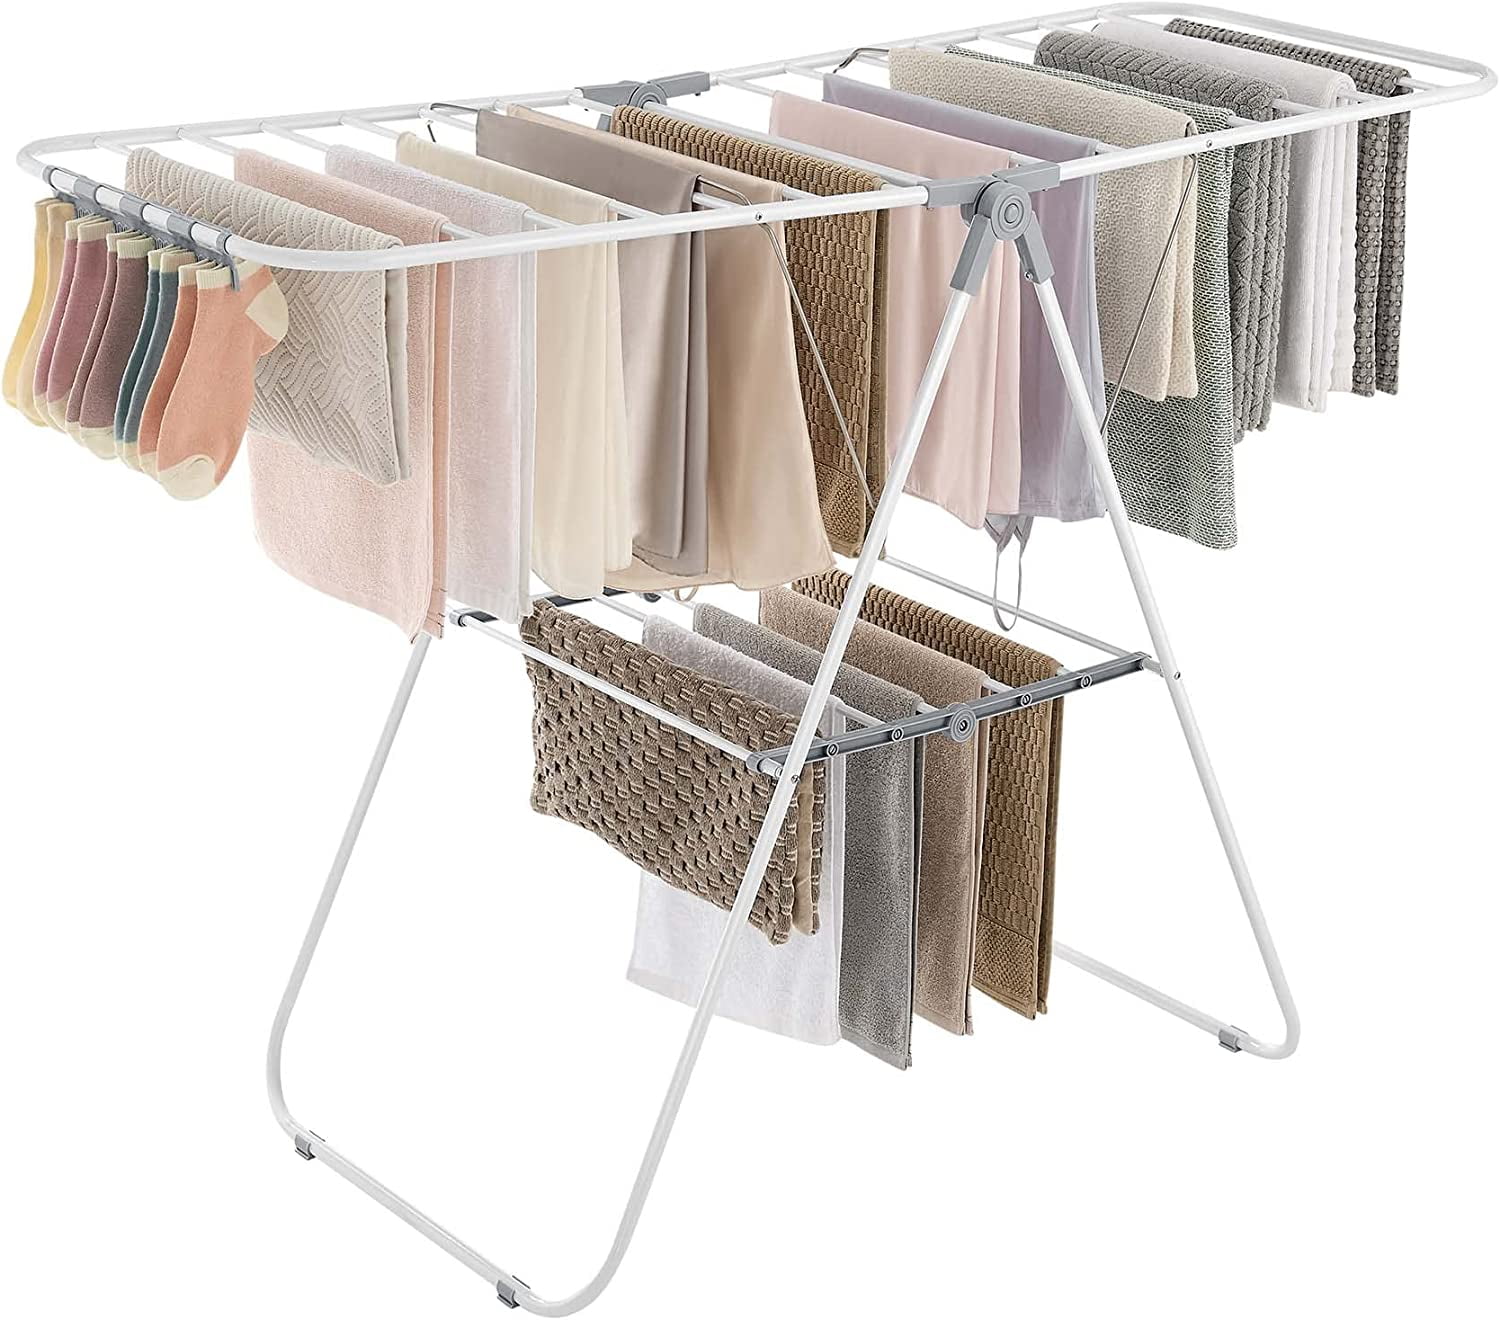  TOOLF Clothes Drying Rack, Aluminum Foldable 2-Level Drying  Racks , Large Laundry Stand with Height-Adjustable Gullwings, Clips Hooks  for Bed Linen, Clothing, Socks, Scarves : Home & Kitchen